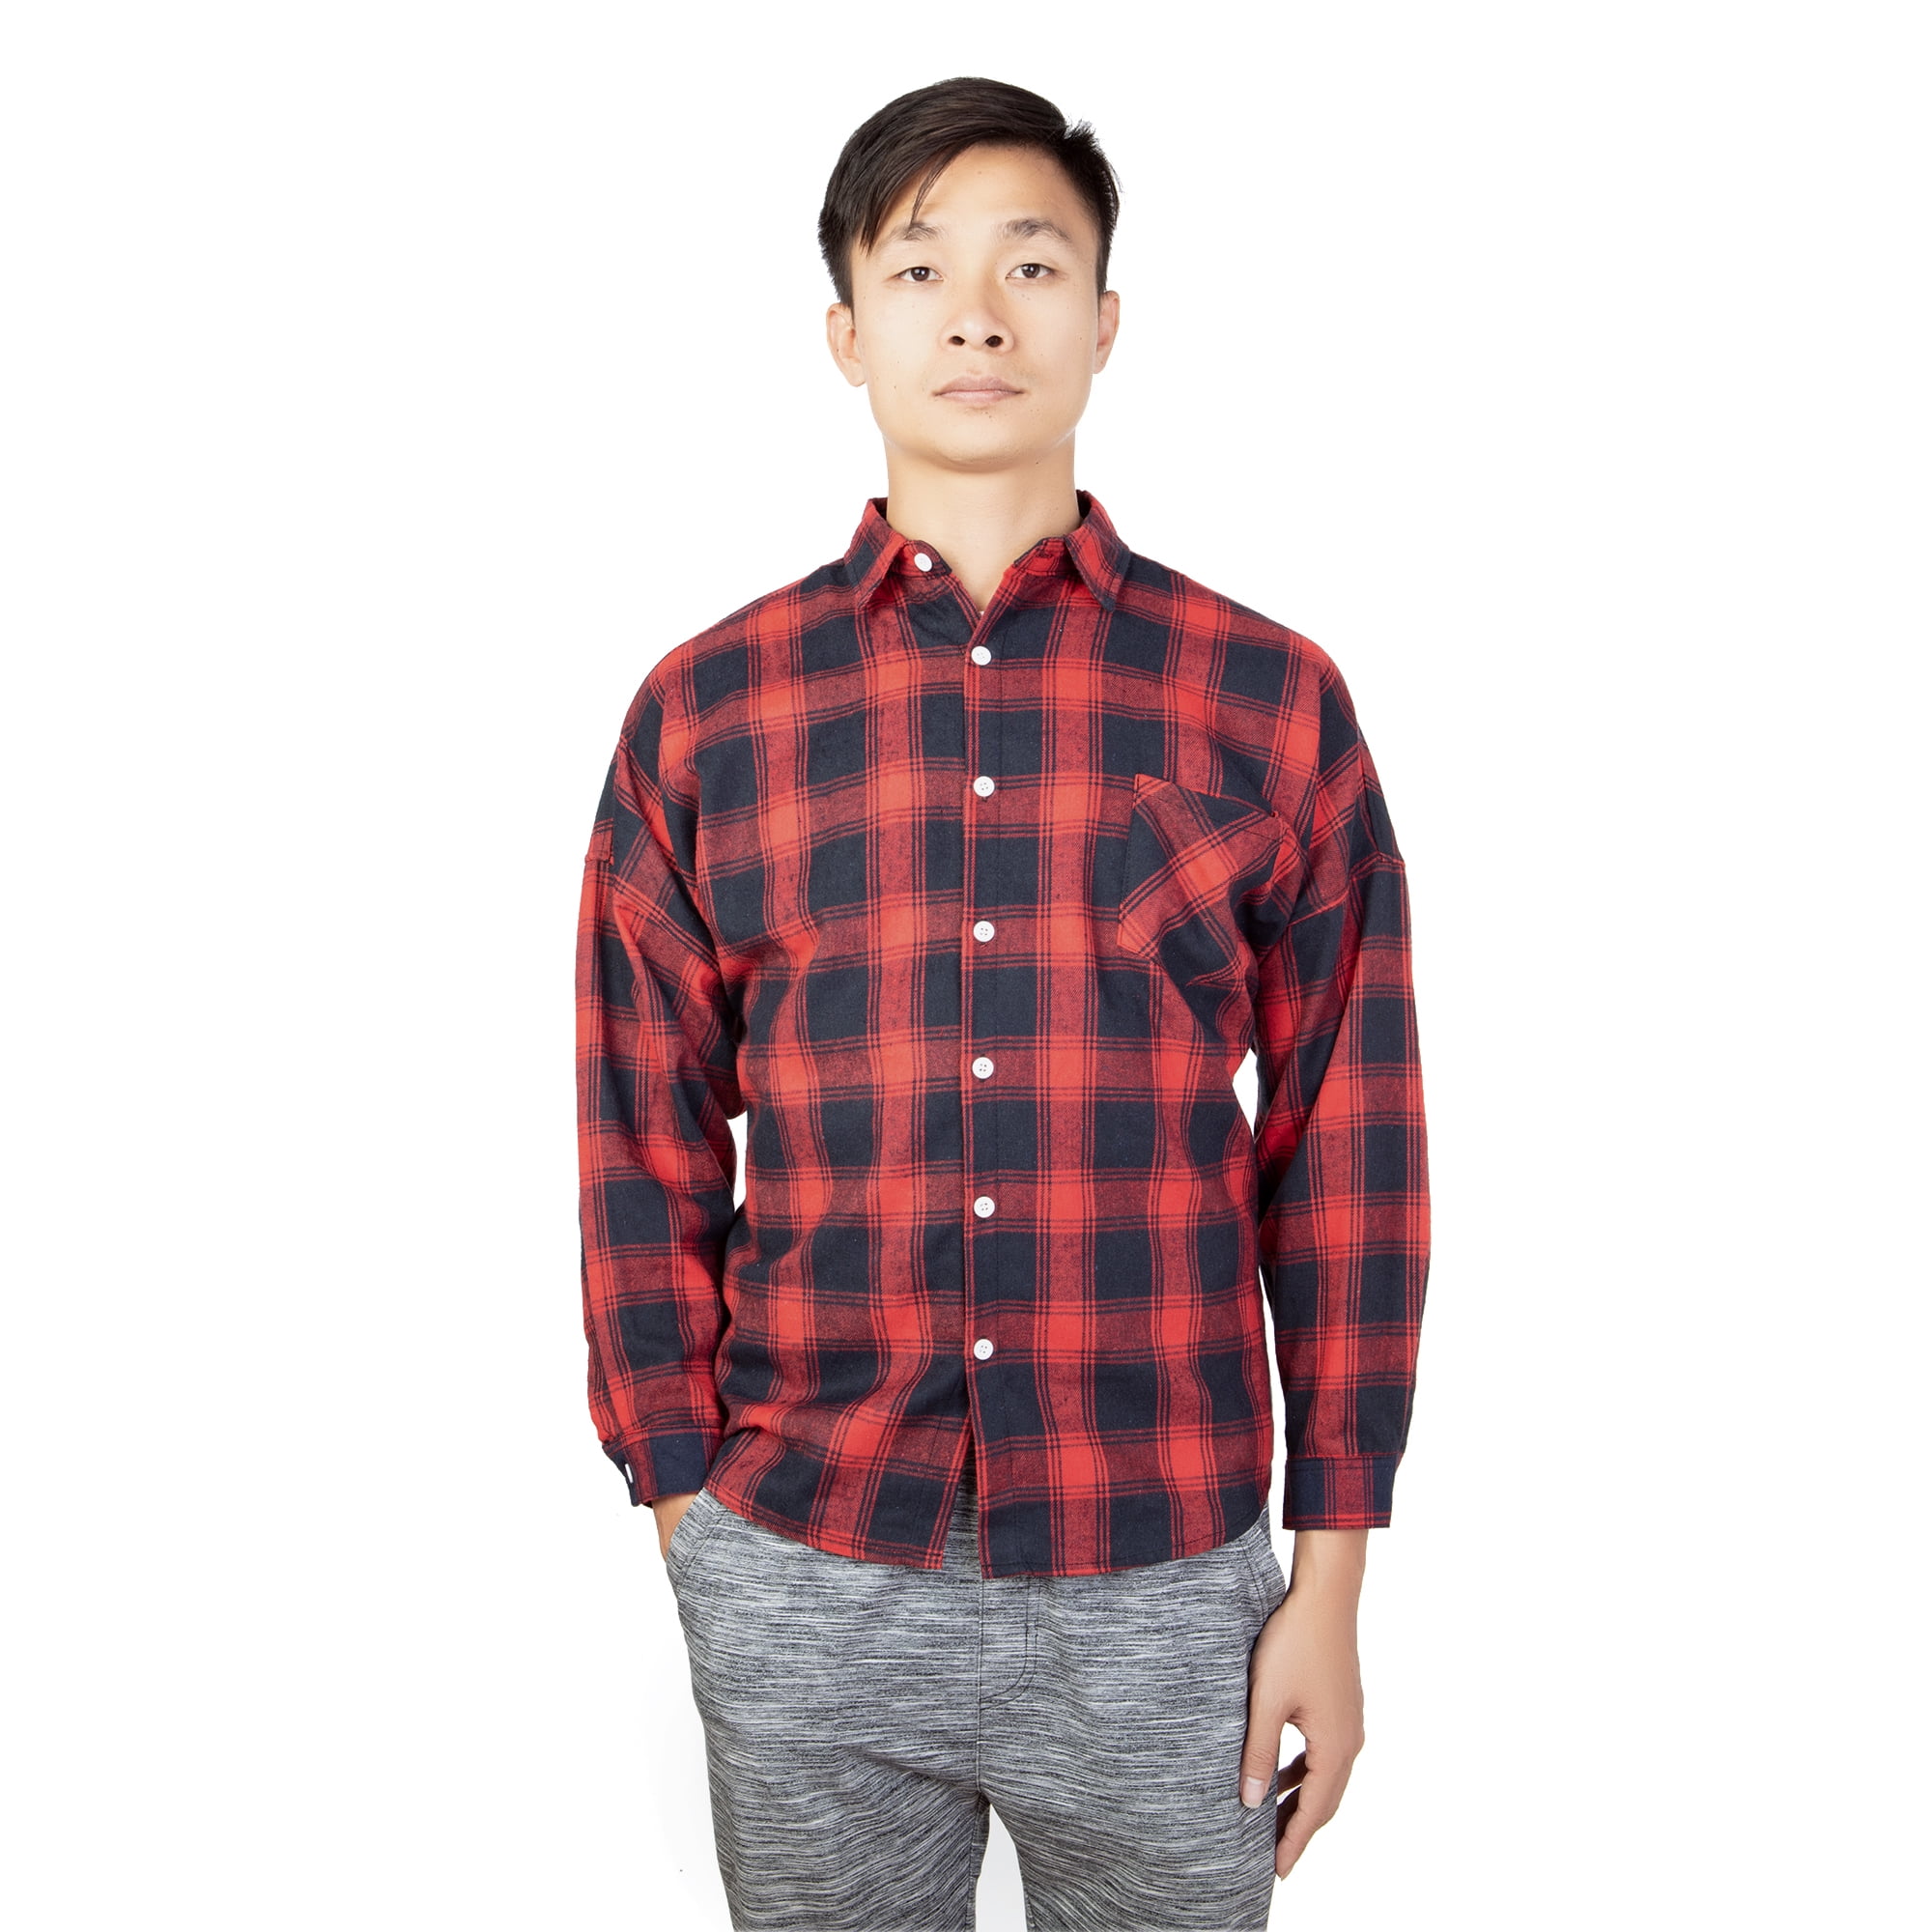 Mens Article 365 Long Sleeve Button-Down Shirt Size Med Red Tartan Plaid NWT $45 